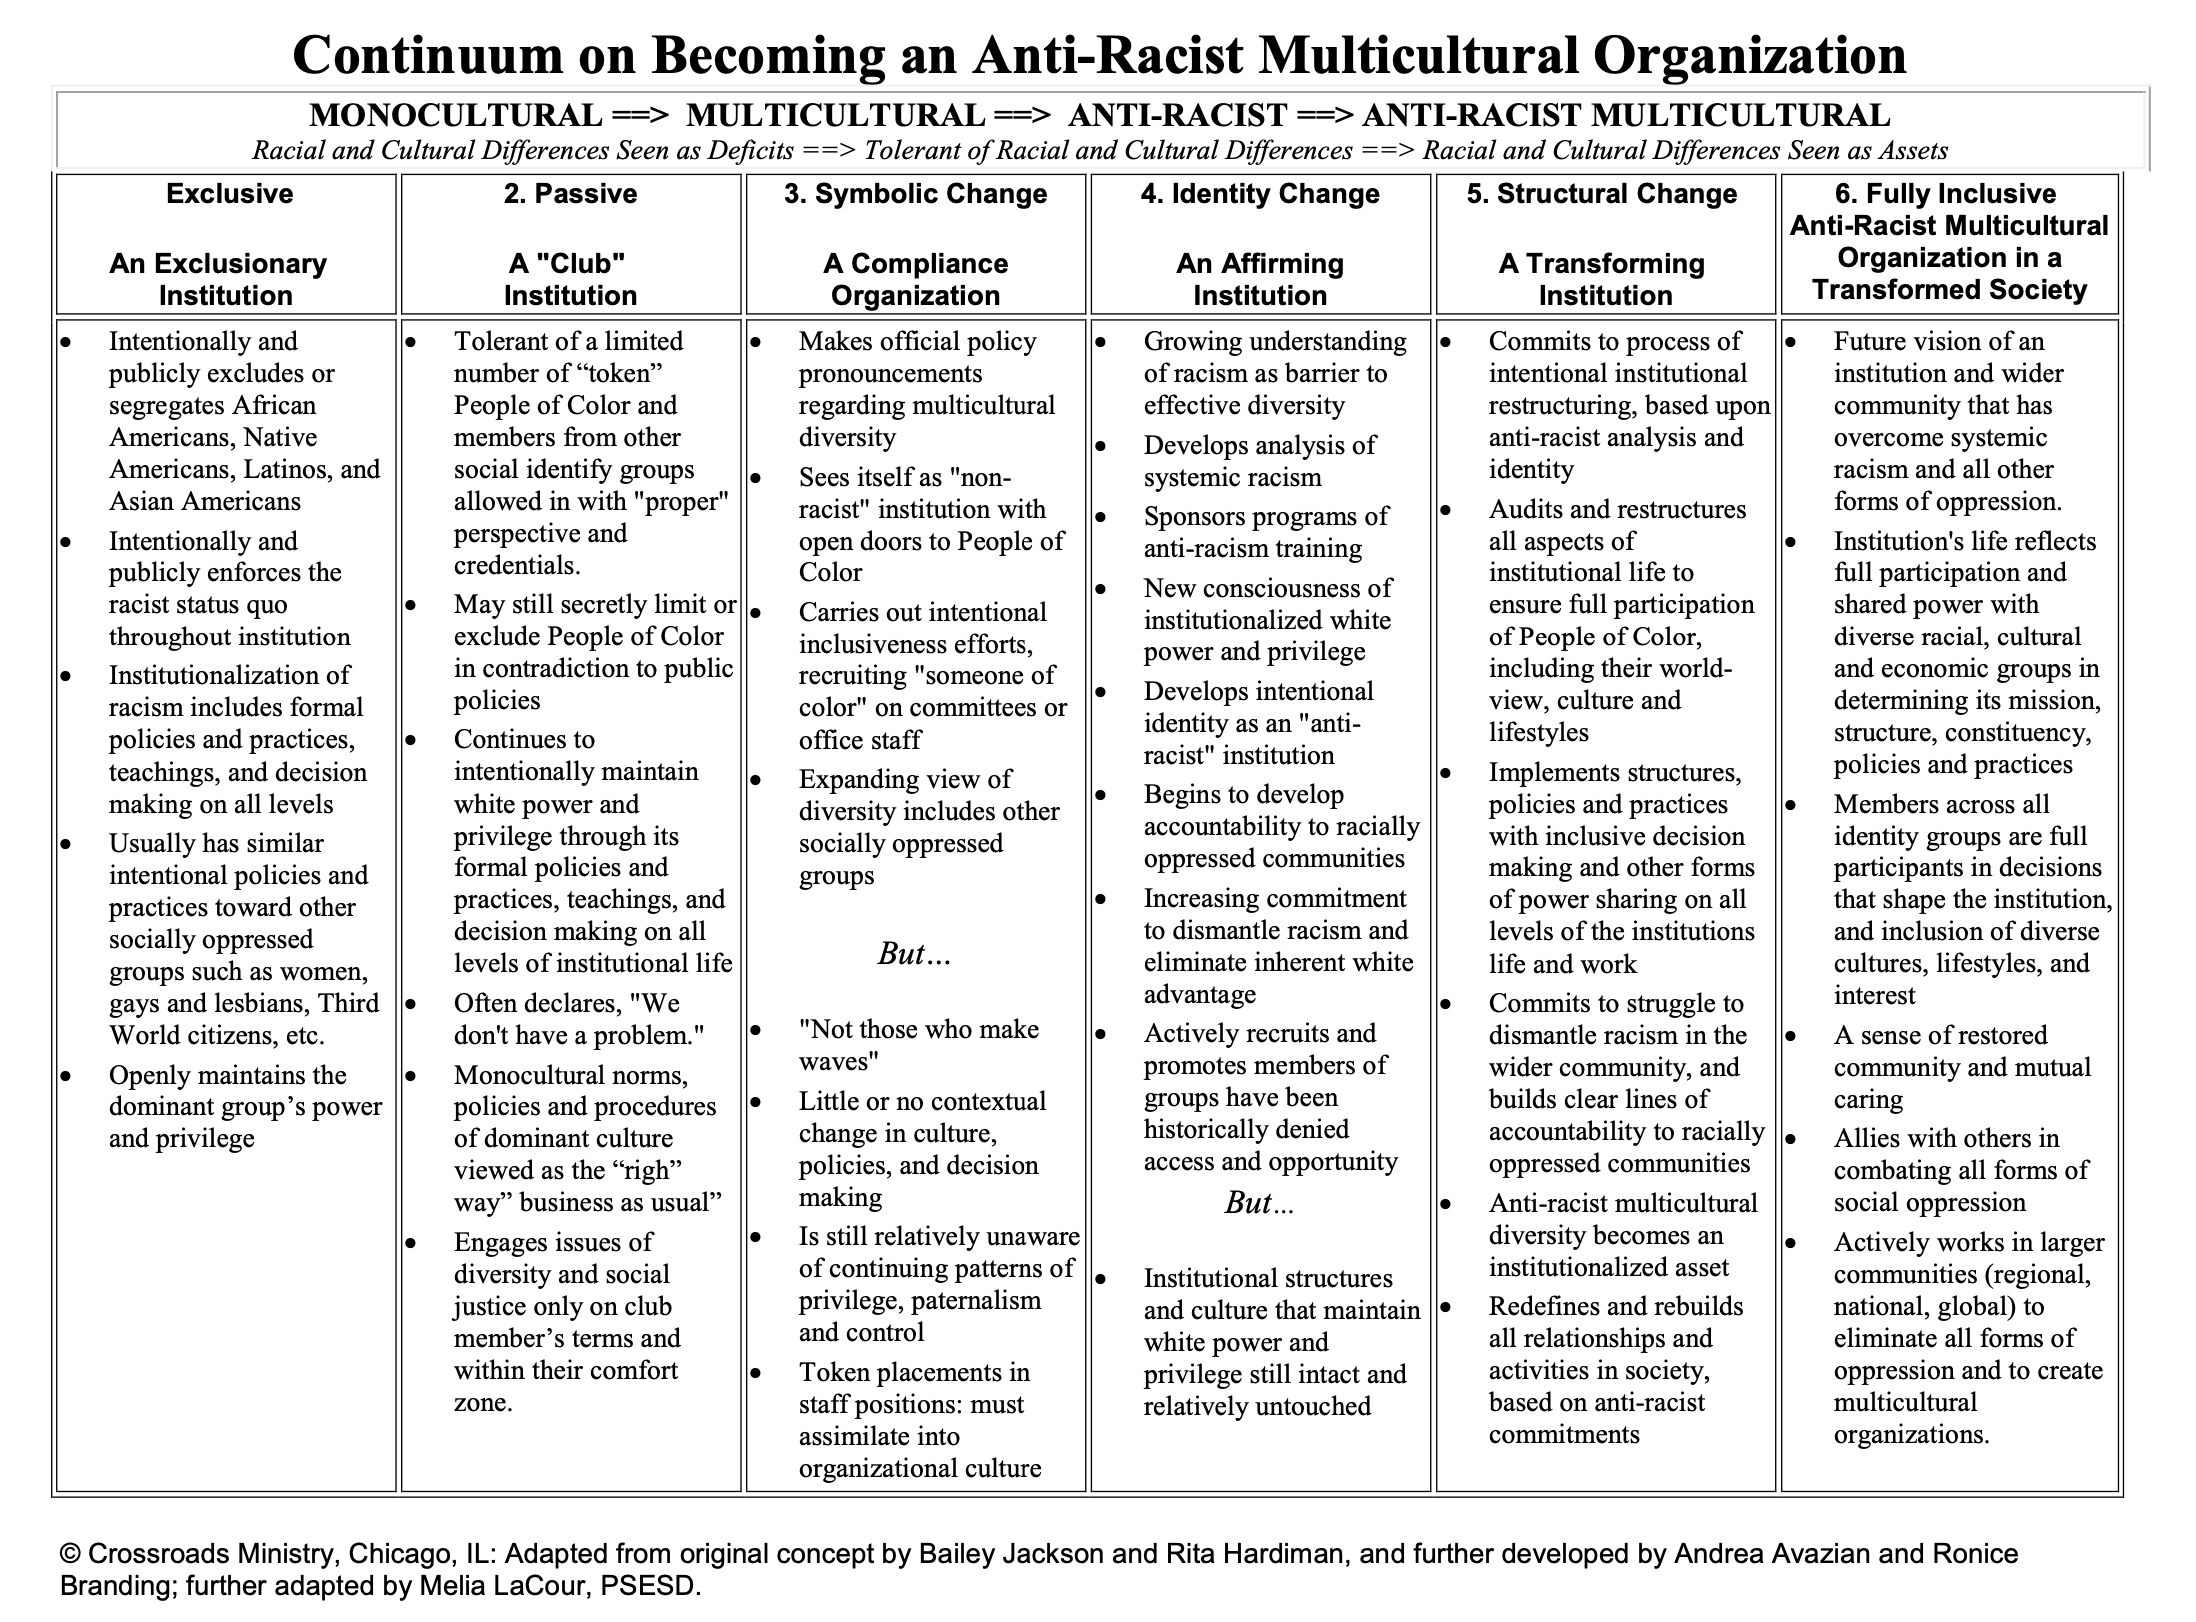 Screenshot of Continuum on Becoming an Anti-Racist Multicultural Organization Document